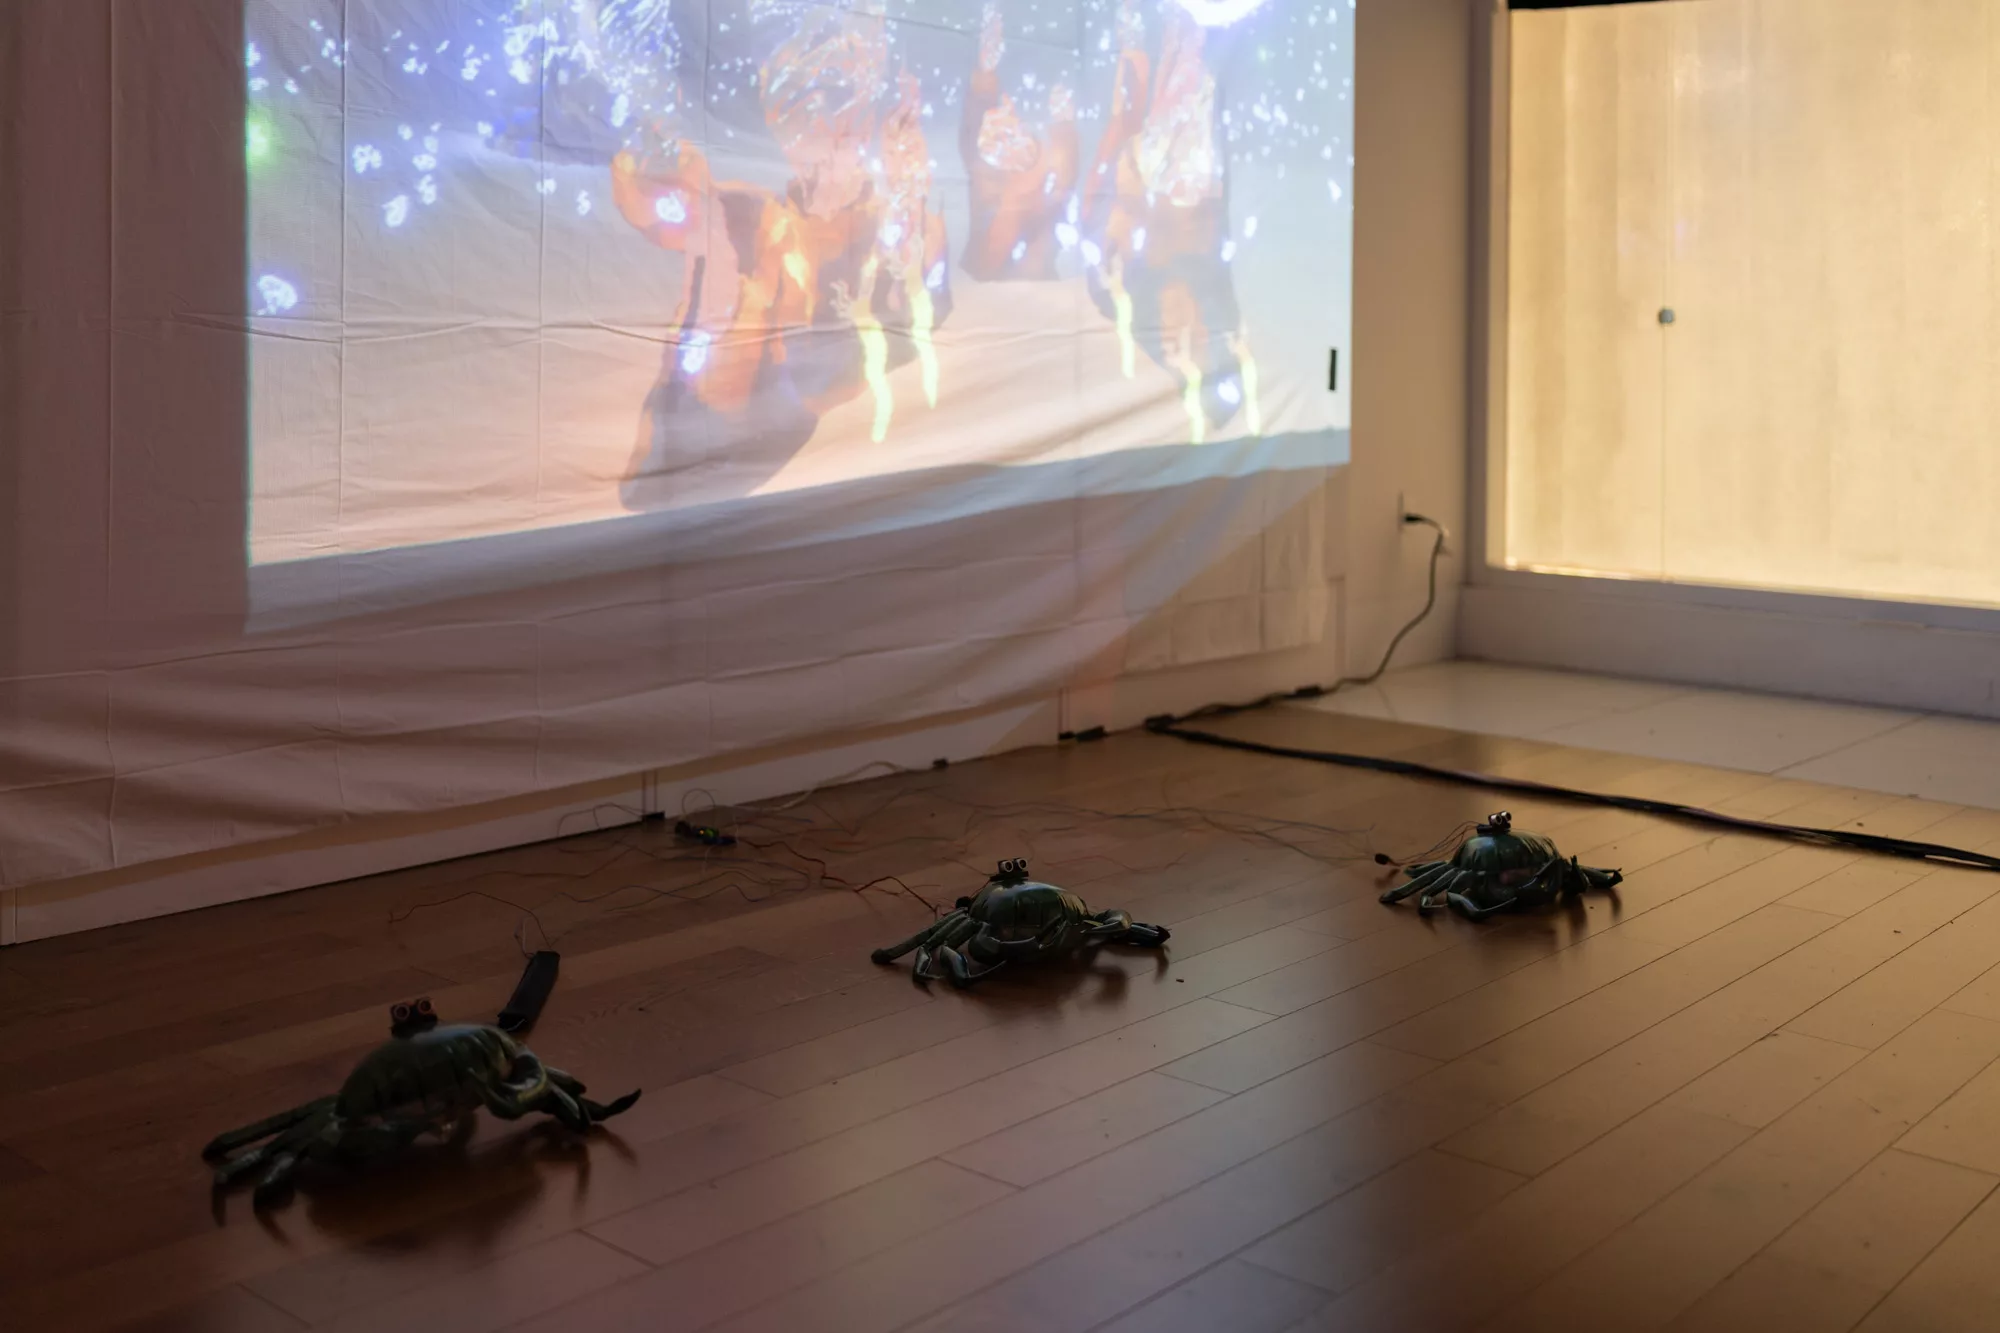 An abstract, low contrast video is projected onto a sheet on a wall. Below the video are three sculptures of crabs, each approximately 1.5 feet wide.